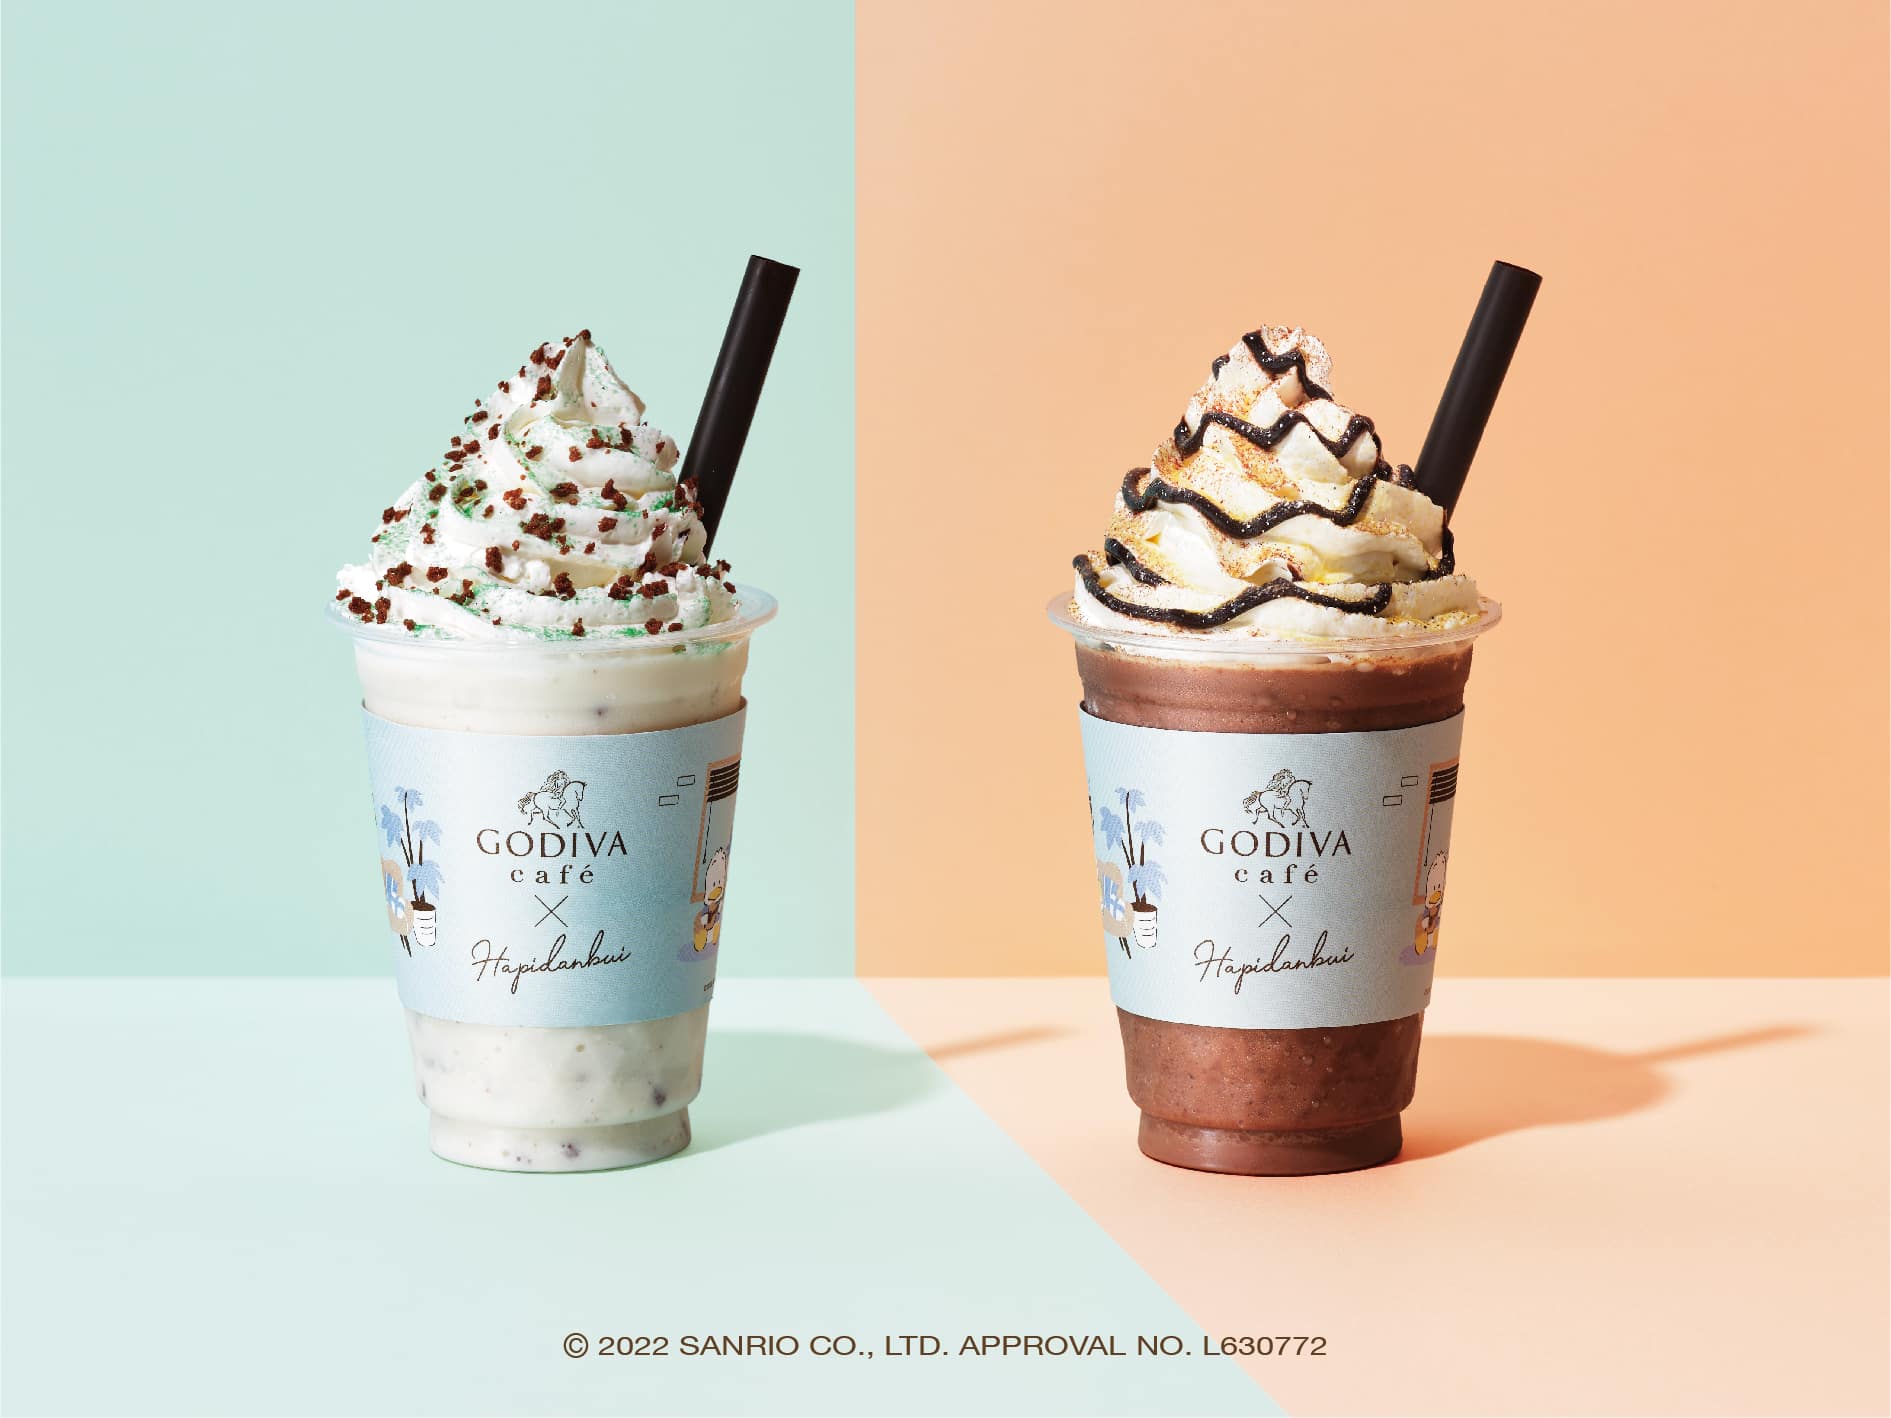 Ryokotomo - afd8e7d1 godiva cafe releases drinks and goods inspired by sanrios hapidanbui